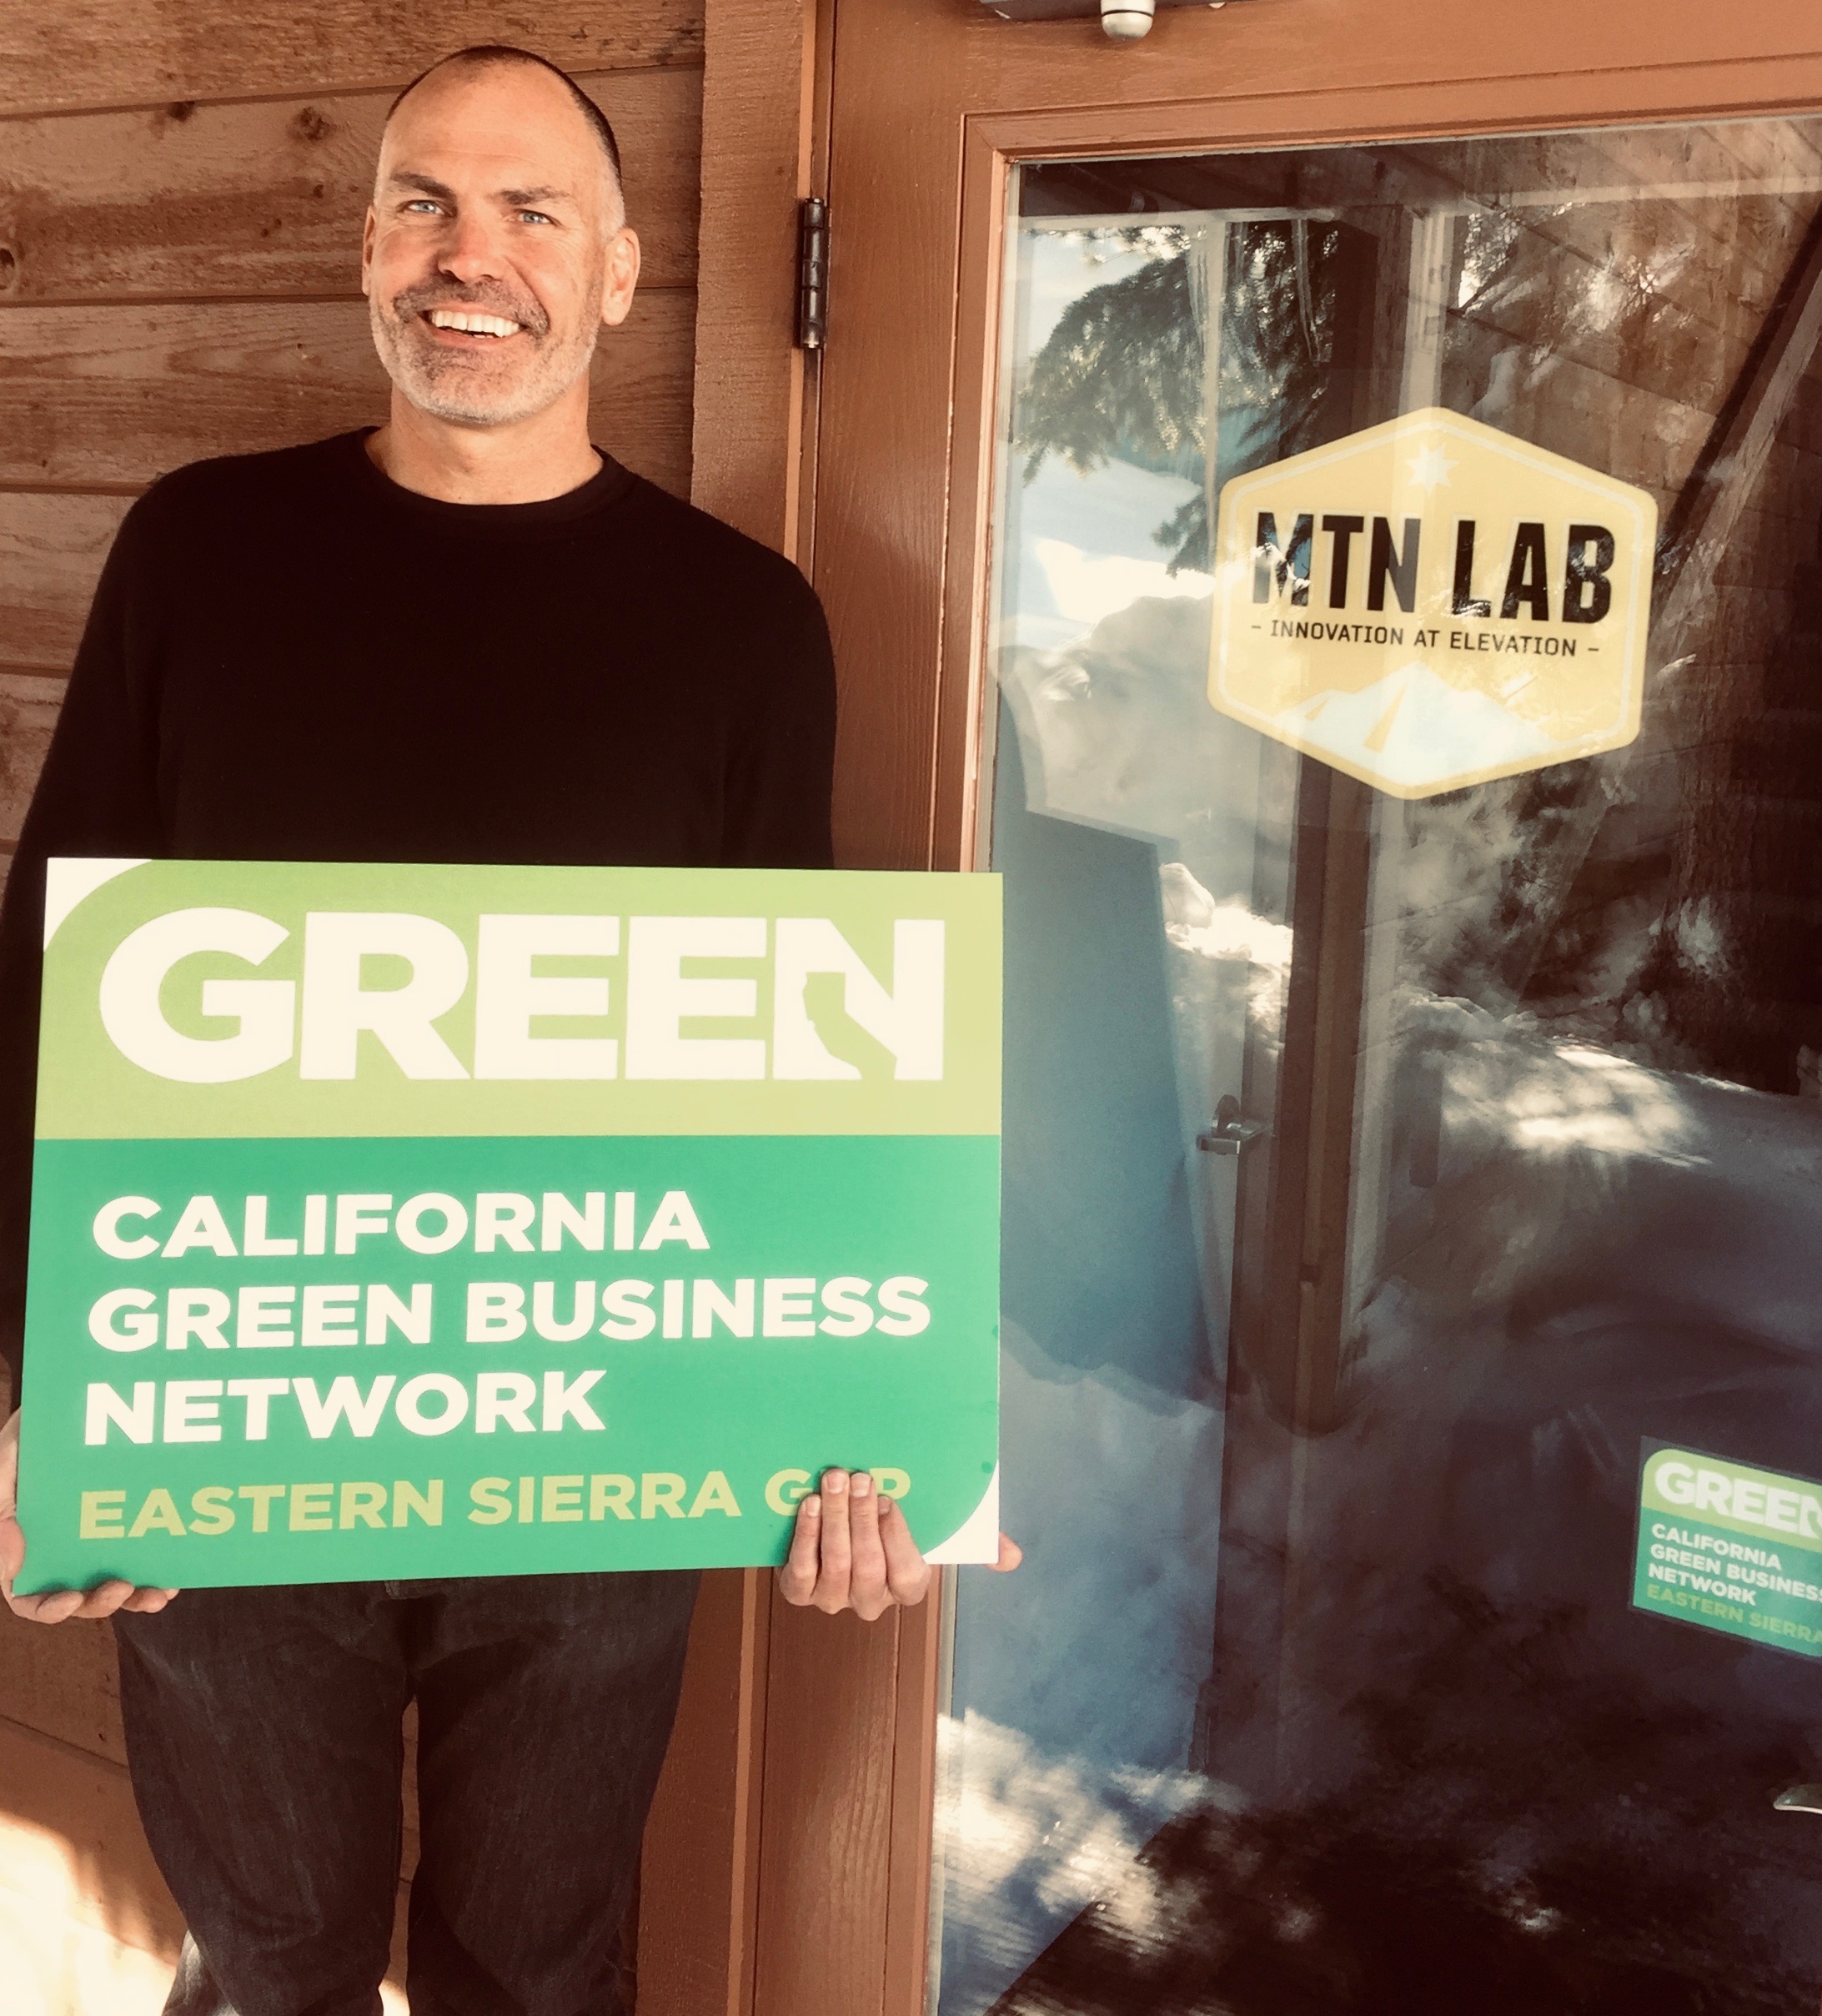 Image for Newest Certified Green Business: The Mountain Lab